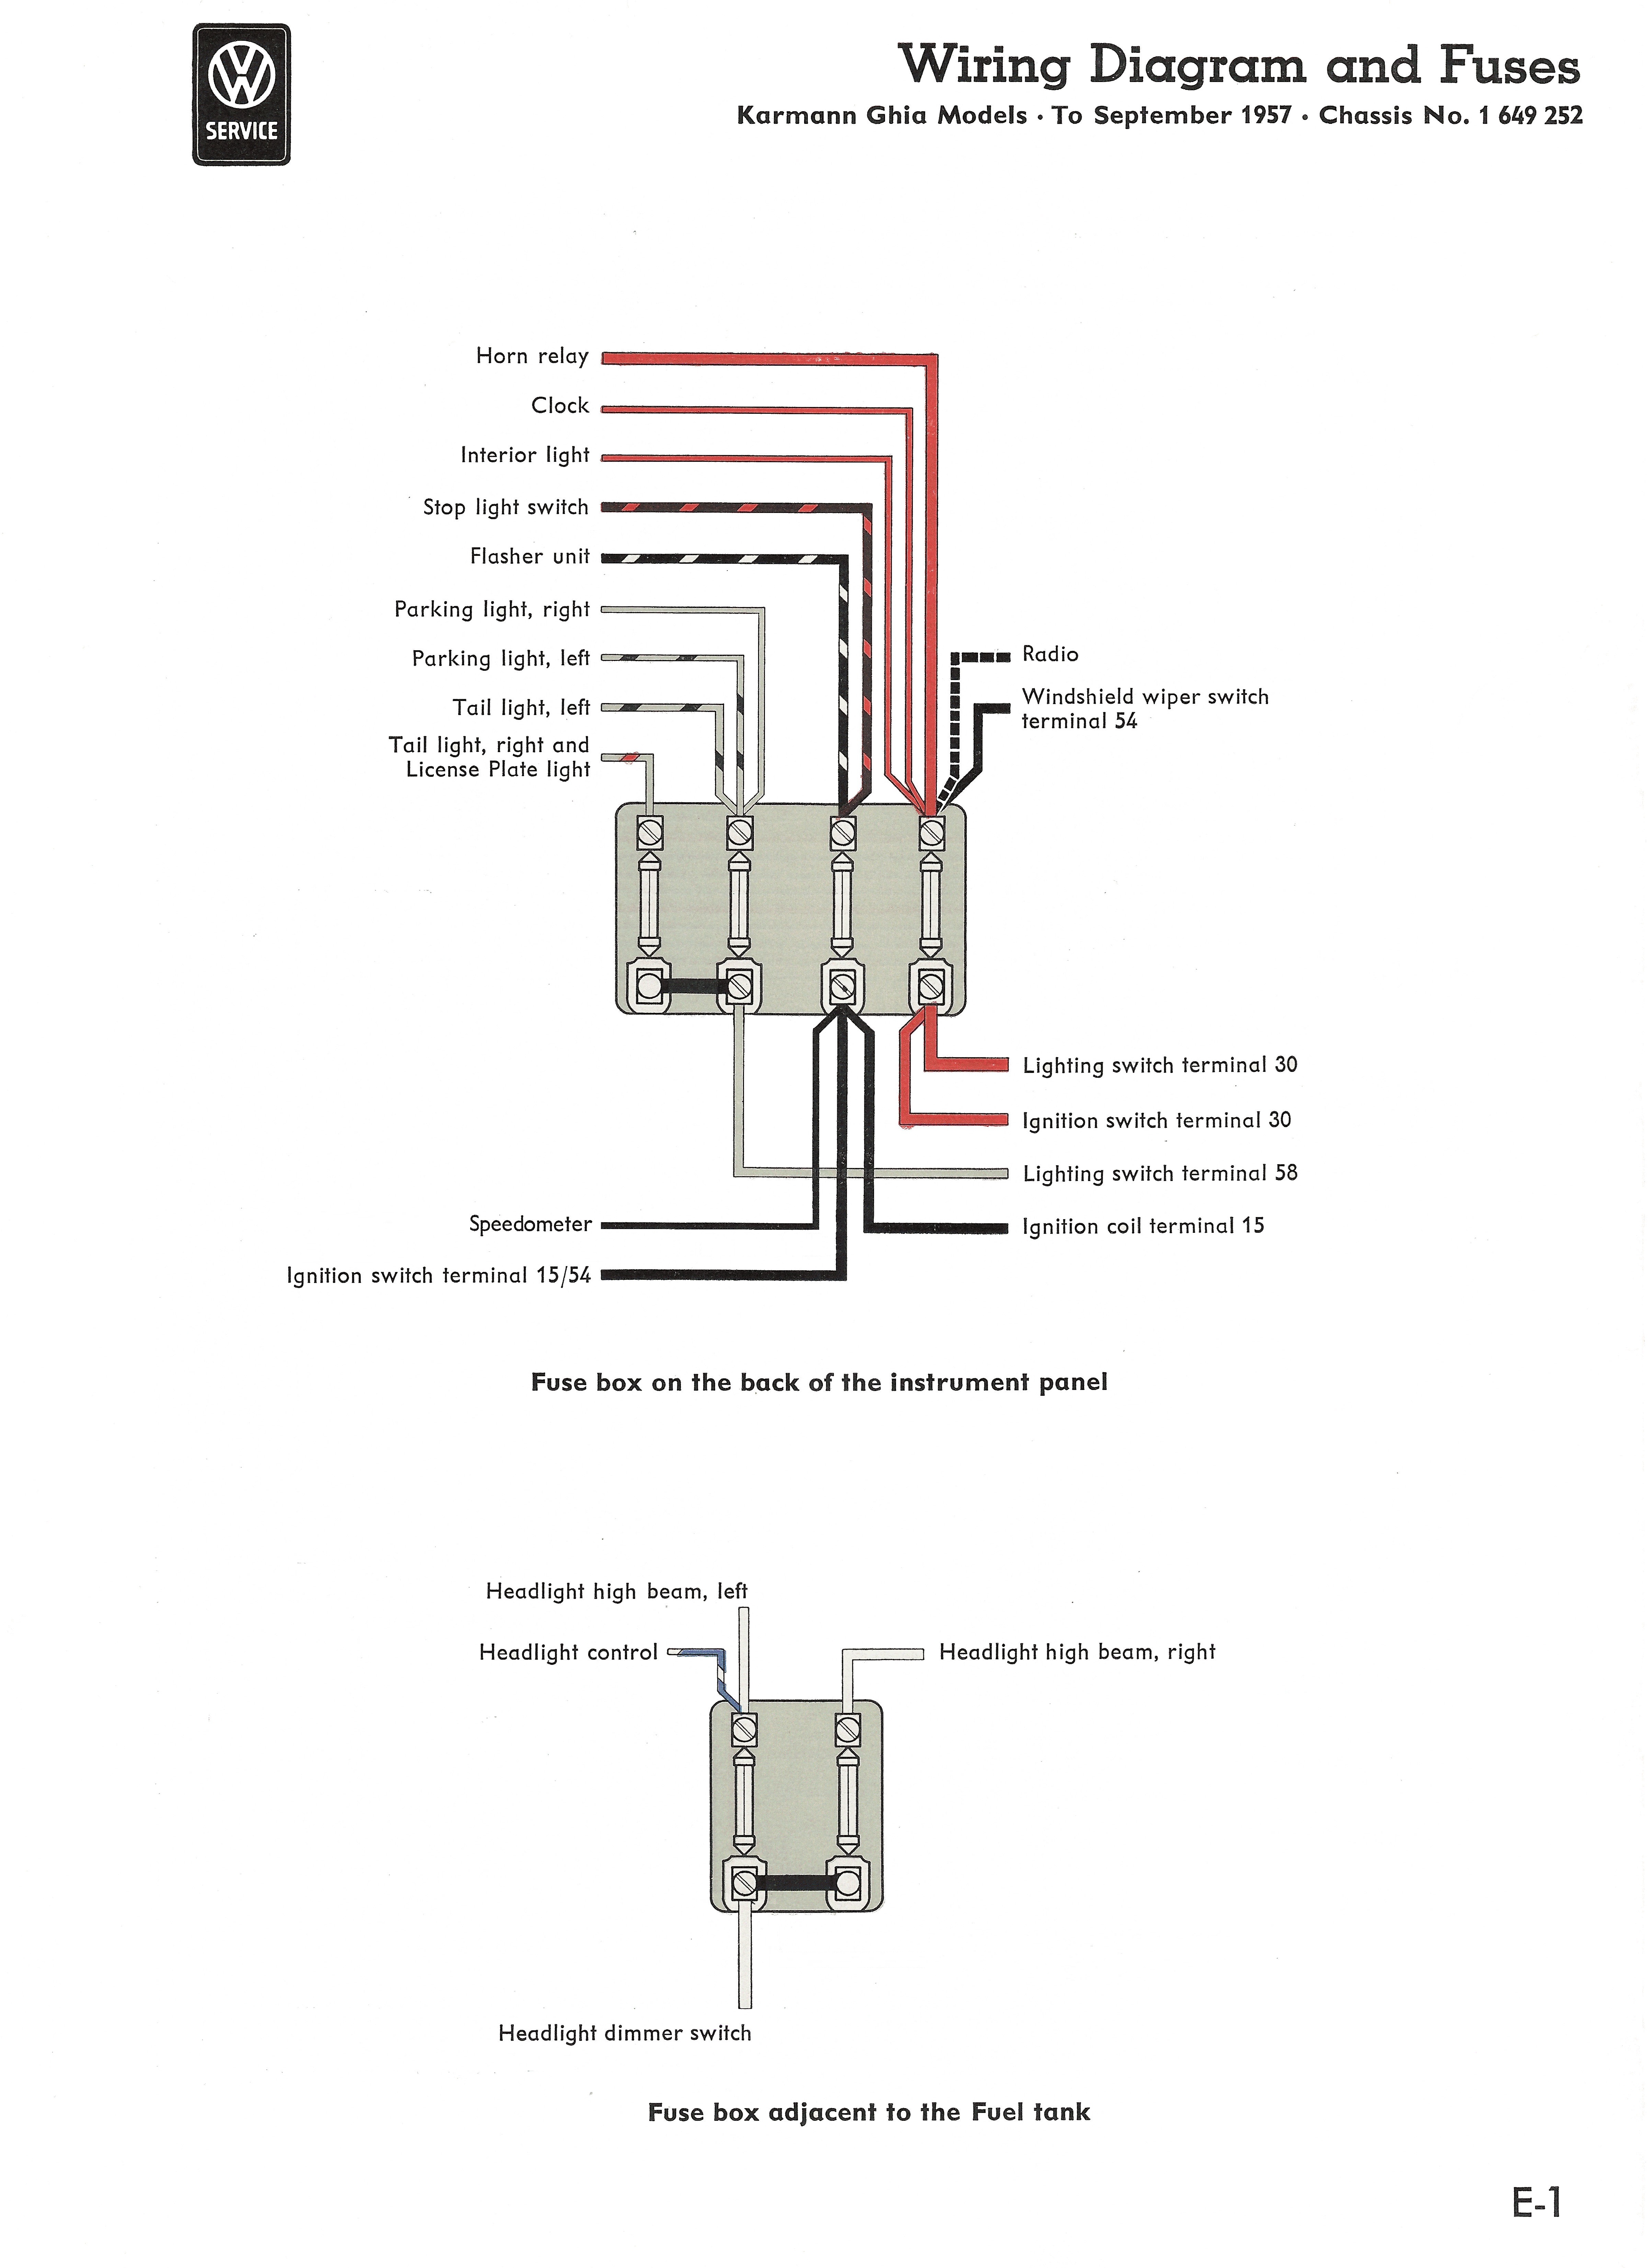 Wiring Diagram For 56 Ignition Switch from thesamba.com